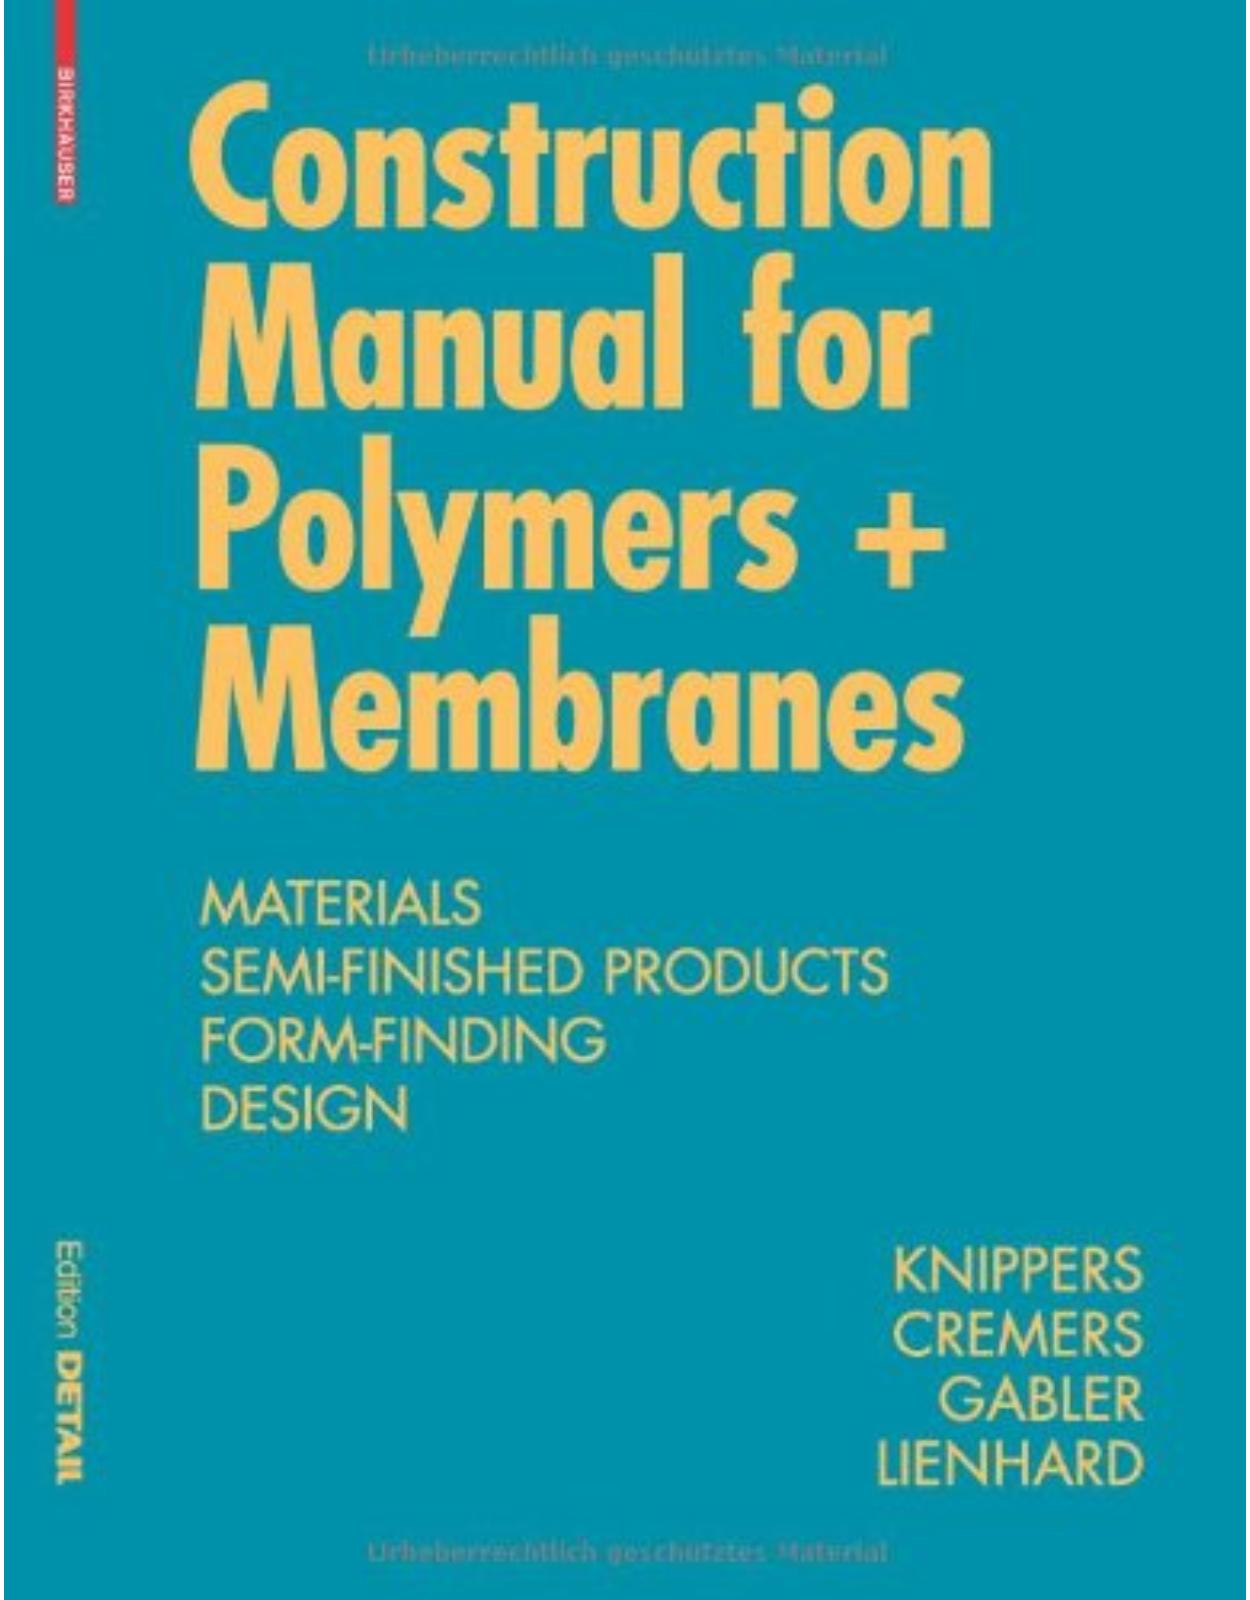 Construction Manual for Polymers + Membranes: Materials / Semi-finished Products / Form Finding / Design (Konstruktionsatlanten)